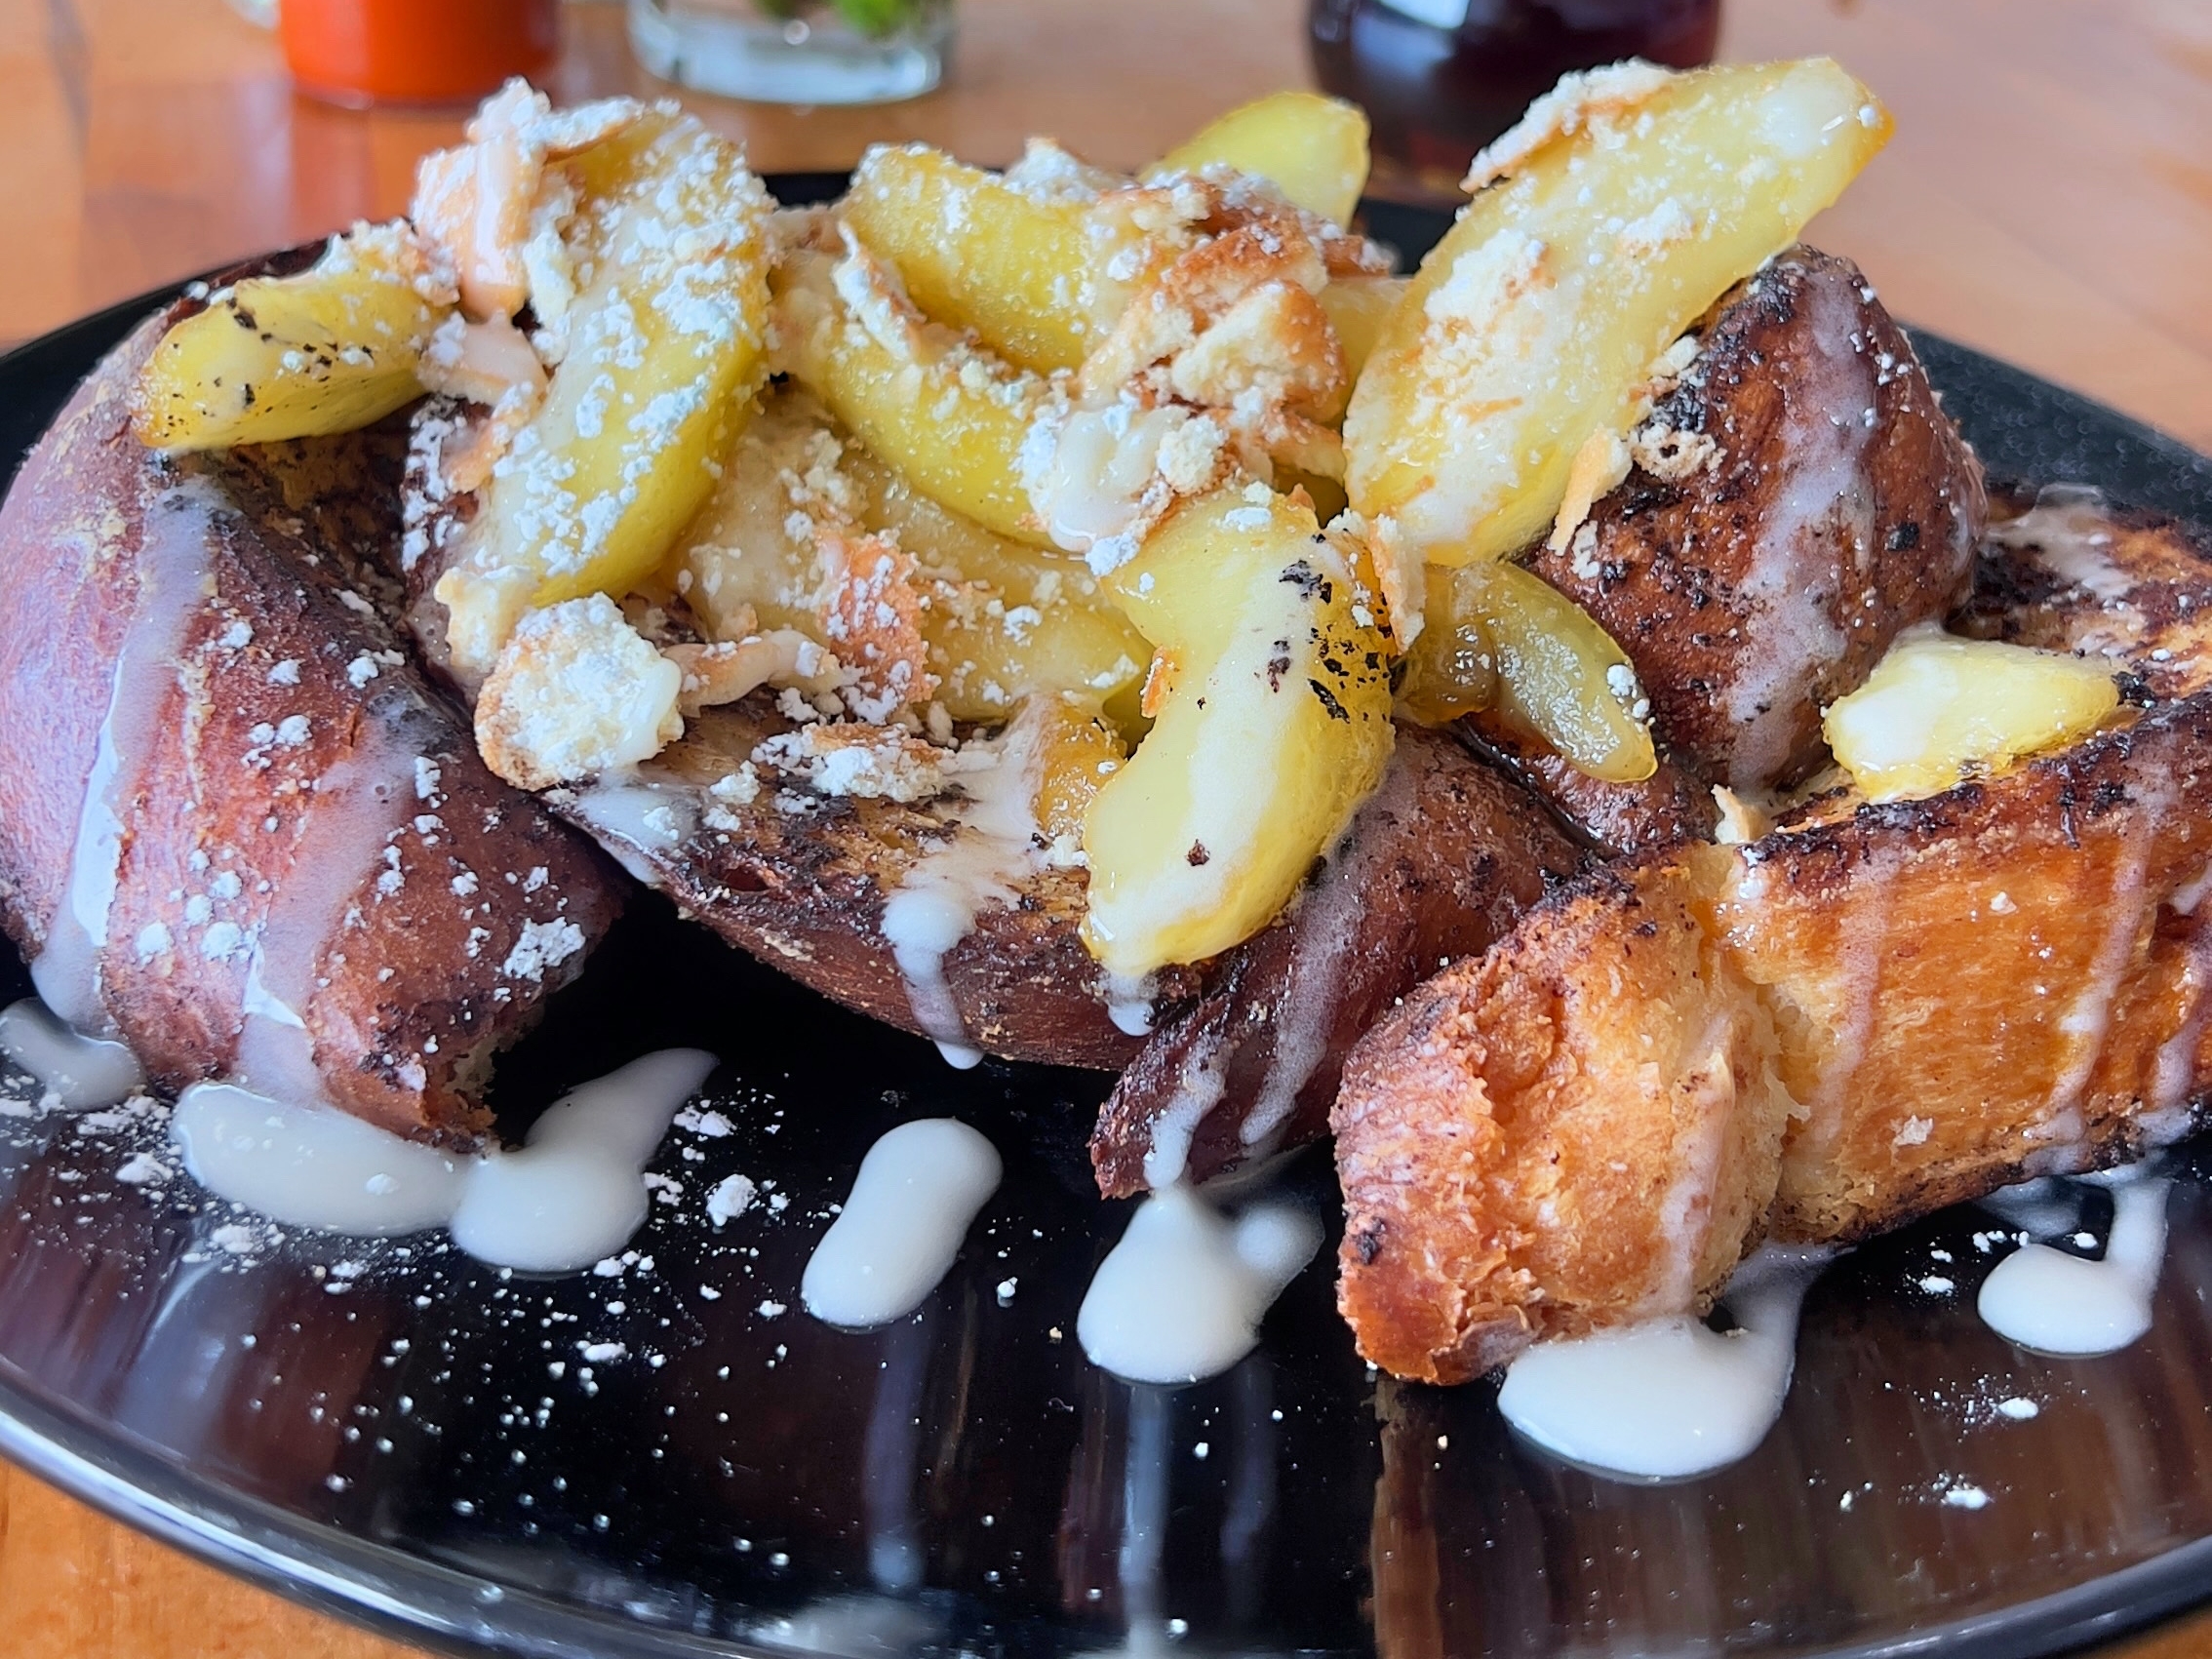 This new brunch spot in N.J. features a French toast cobbler 